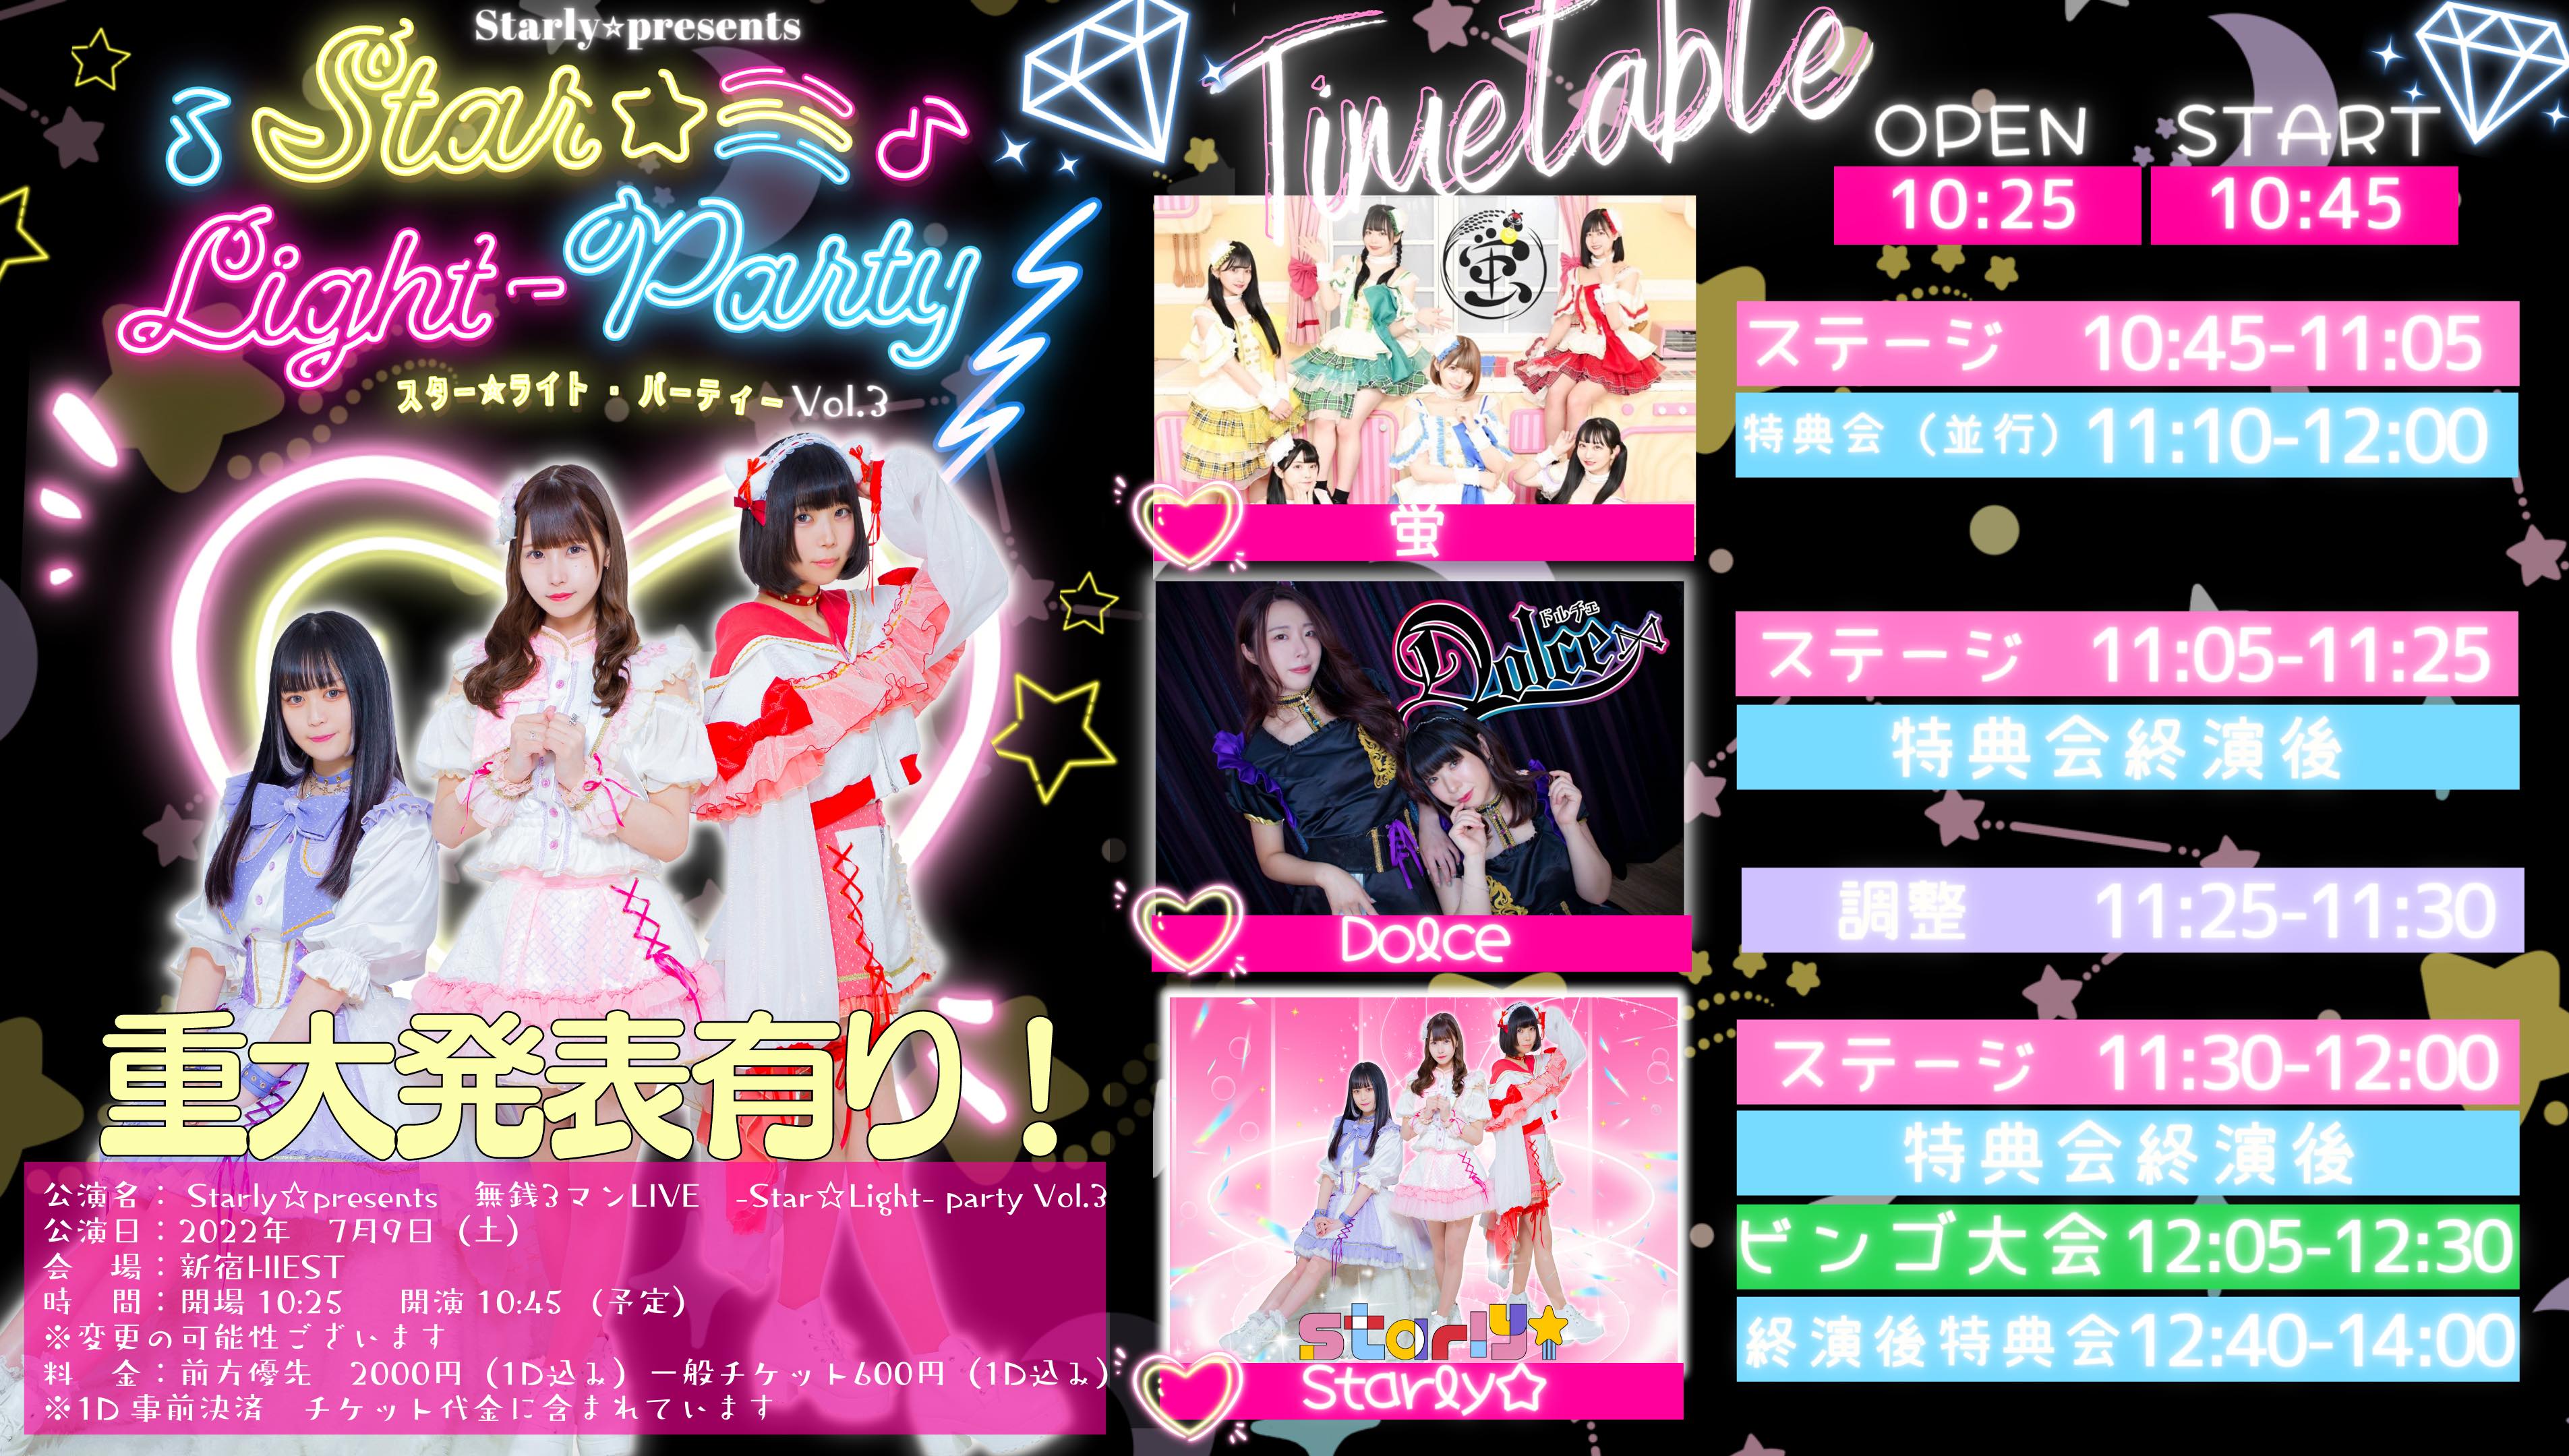 Starly☆presents　無銭3マンLIVE-Star☆Light-Party Vol.3 　